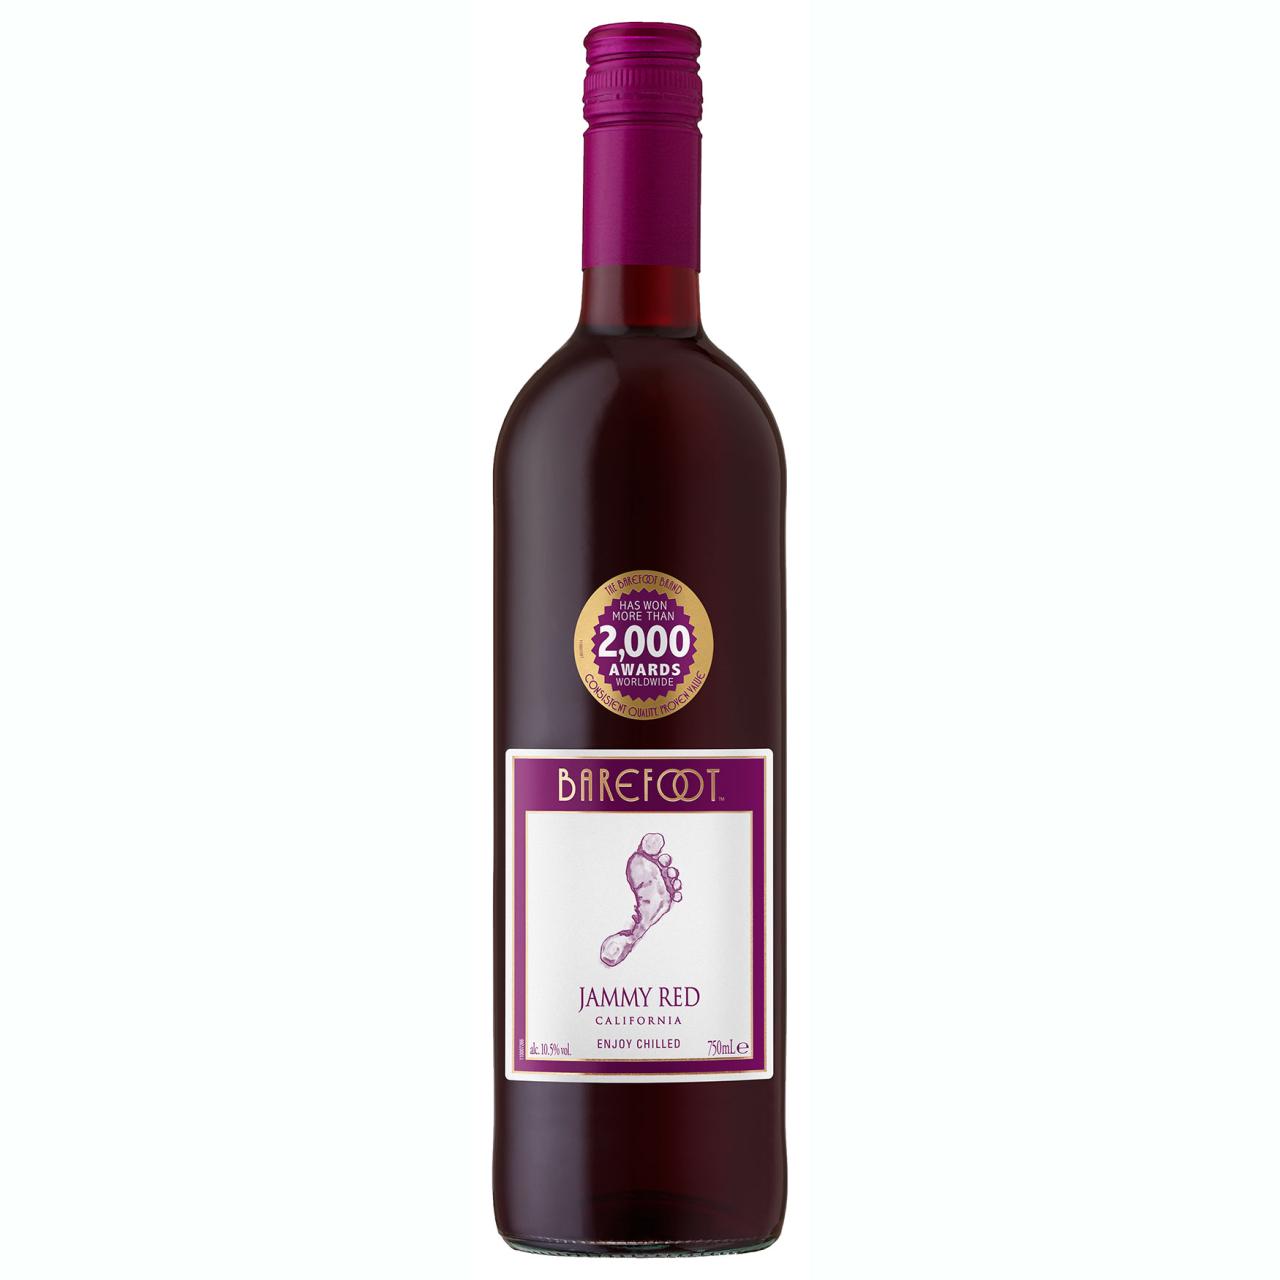 Barefoot Jammy Red 10,5% 0,75l